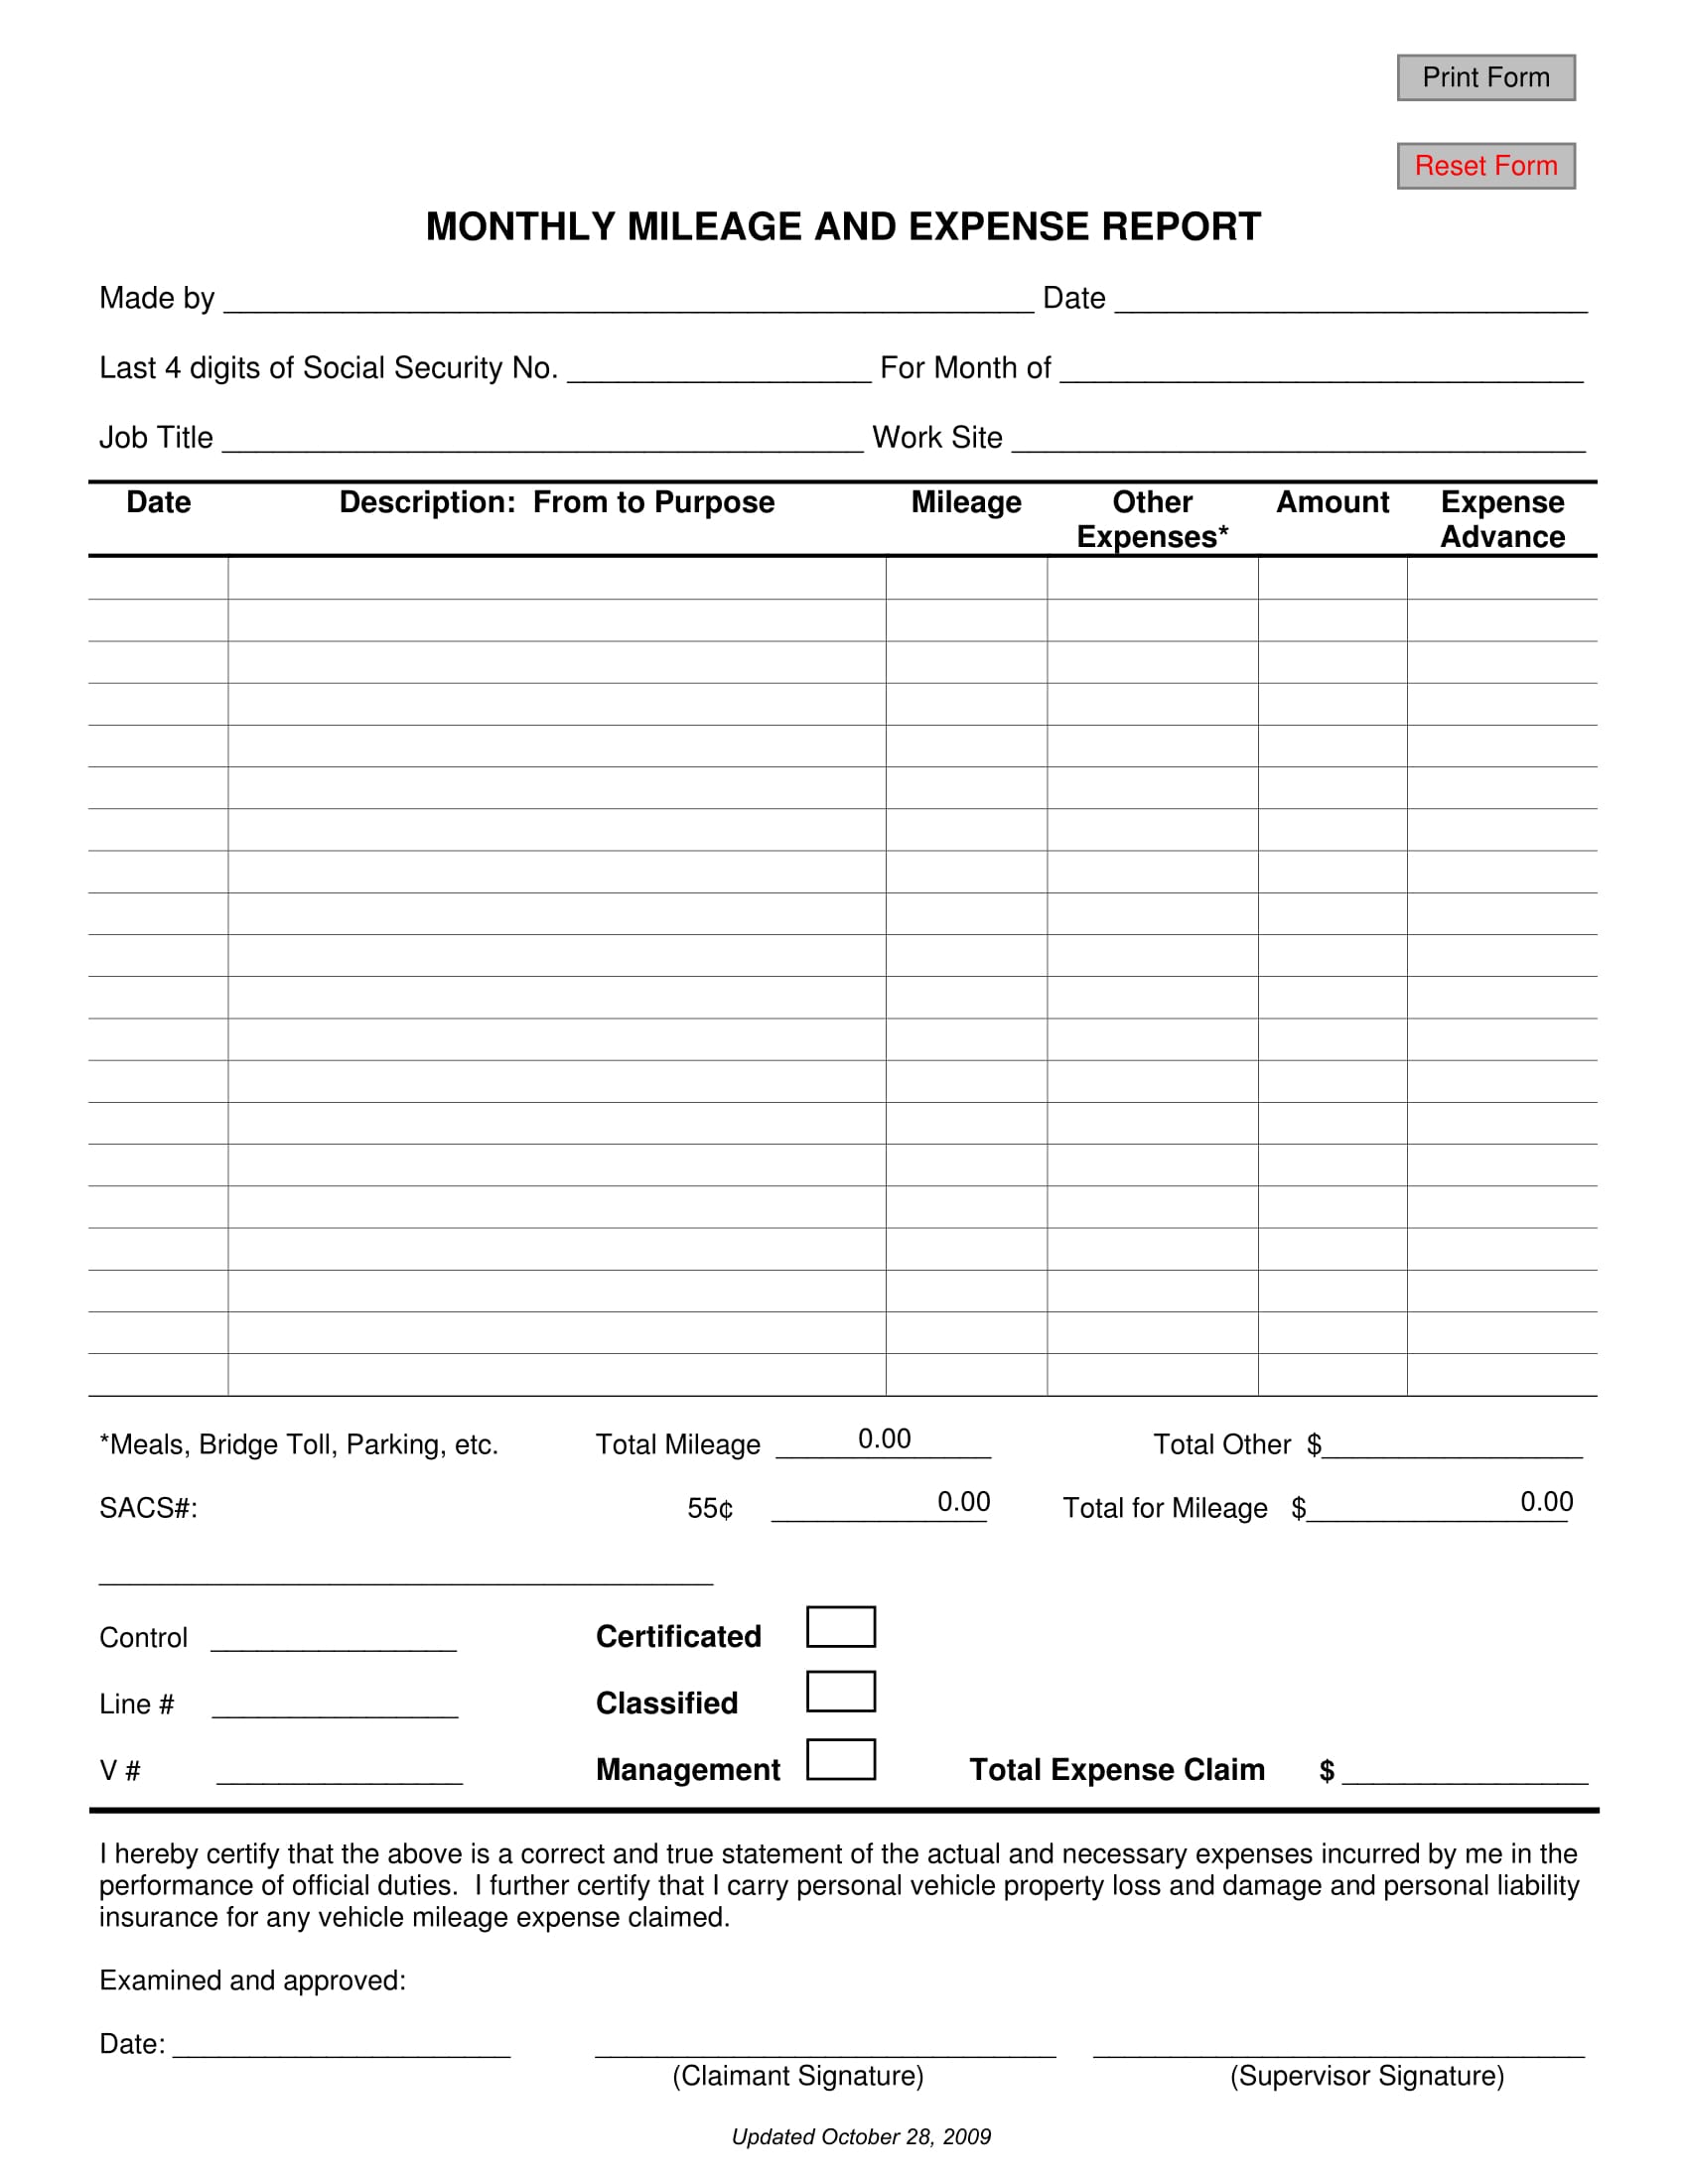 monthly mileage and expense report form 1